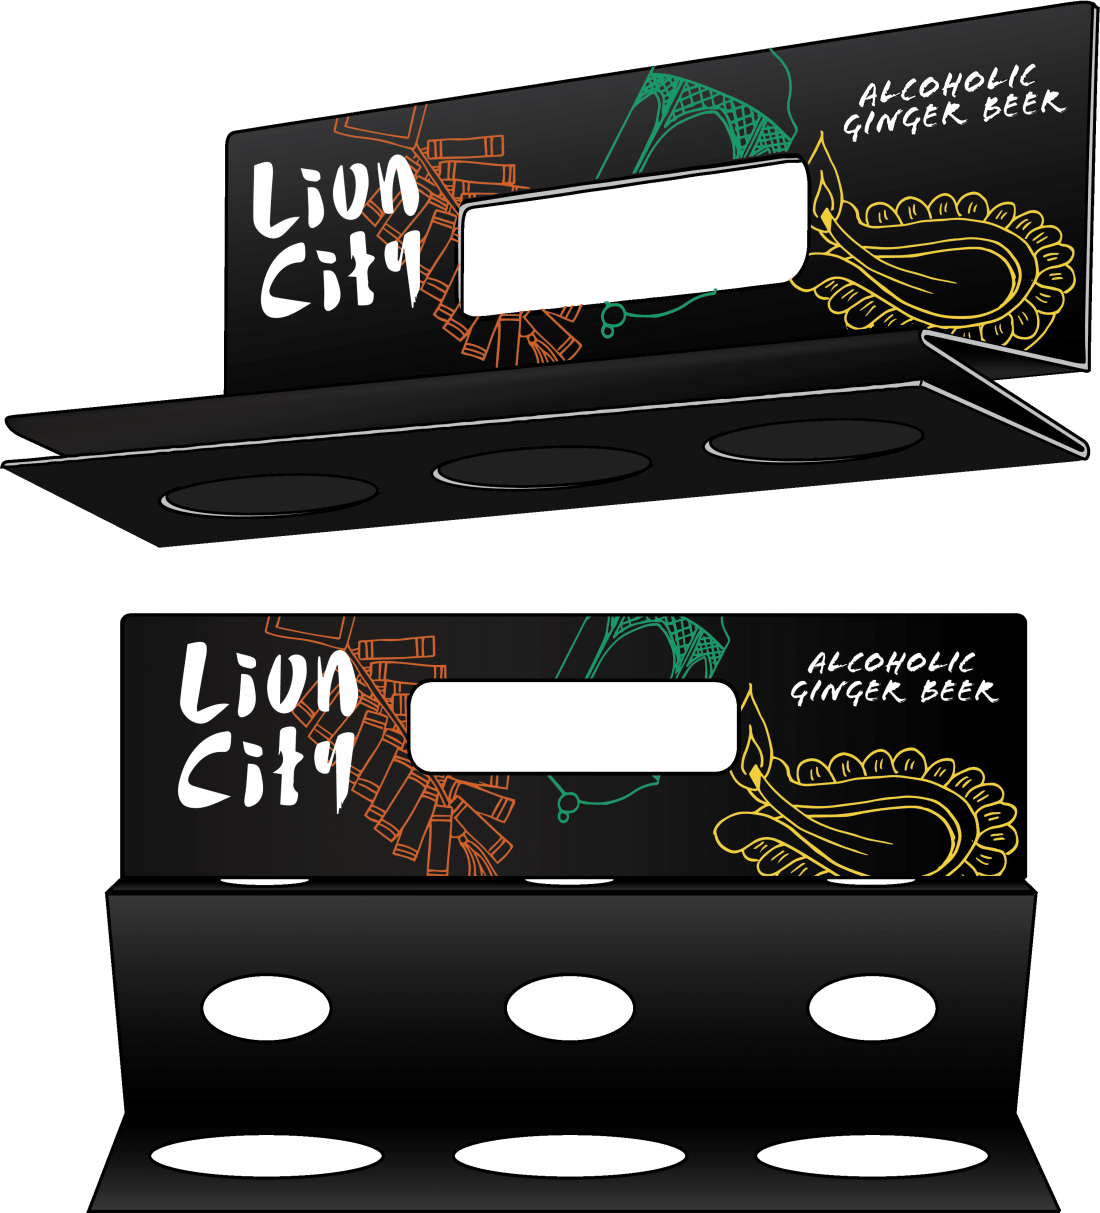 Lion City Ginger Beer Packaging Structure